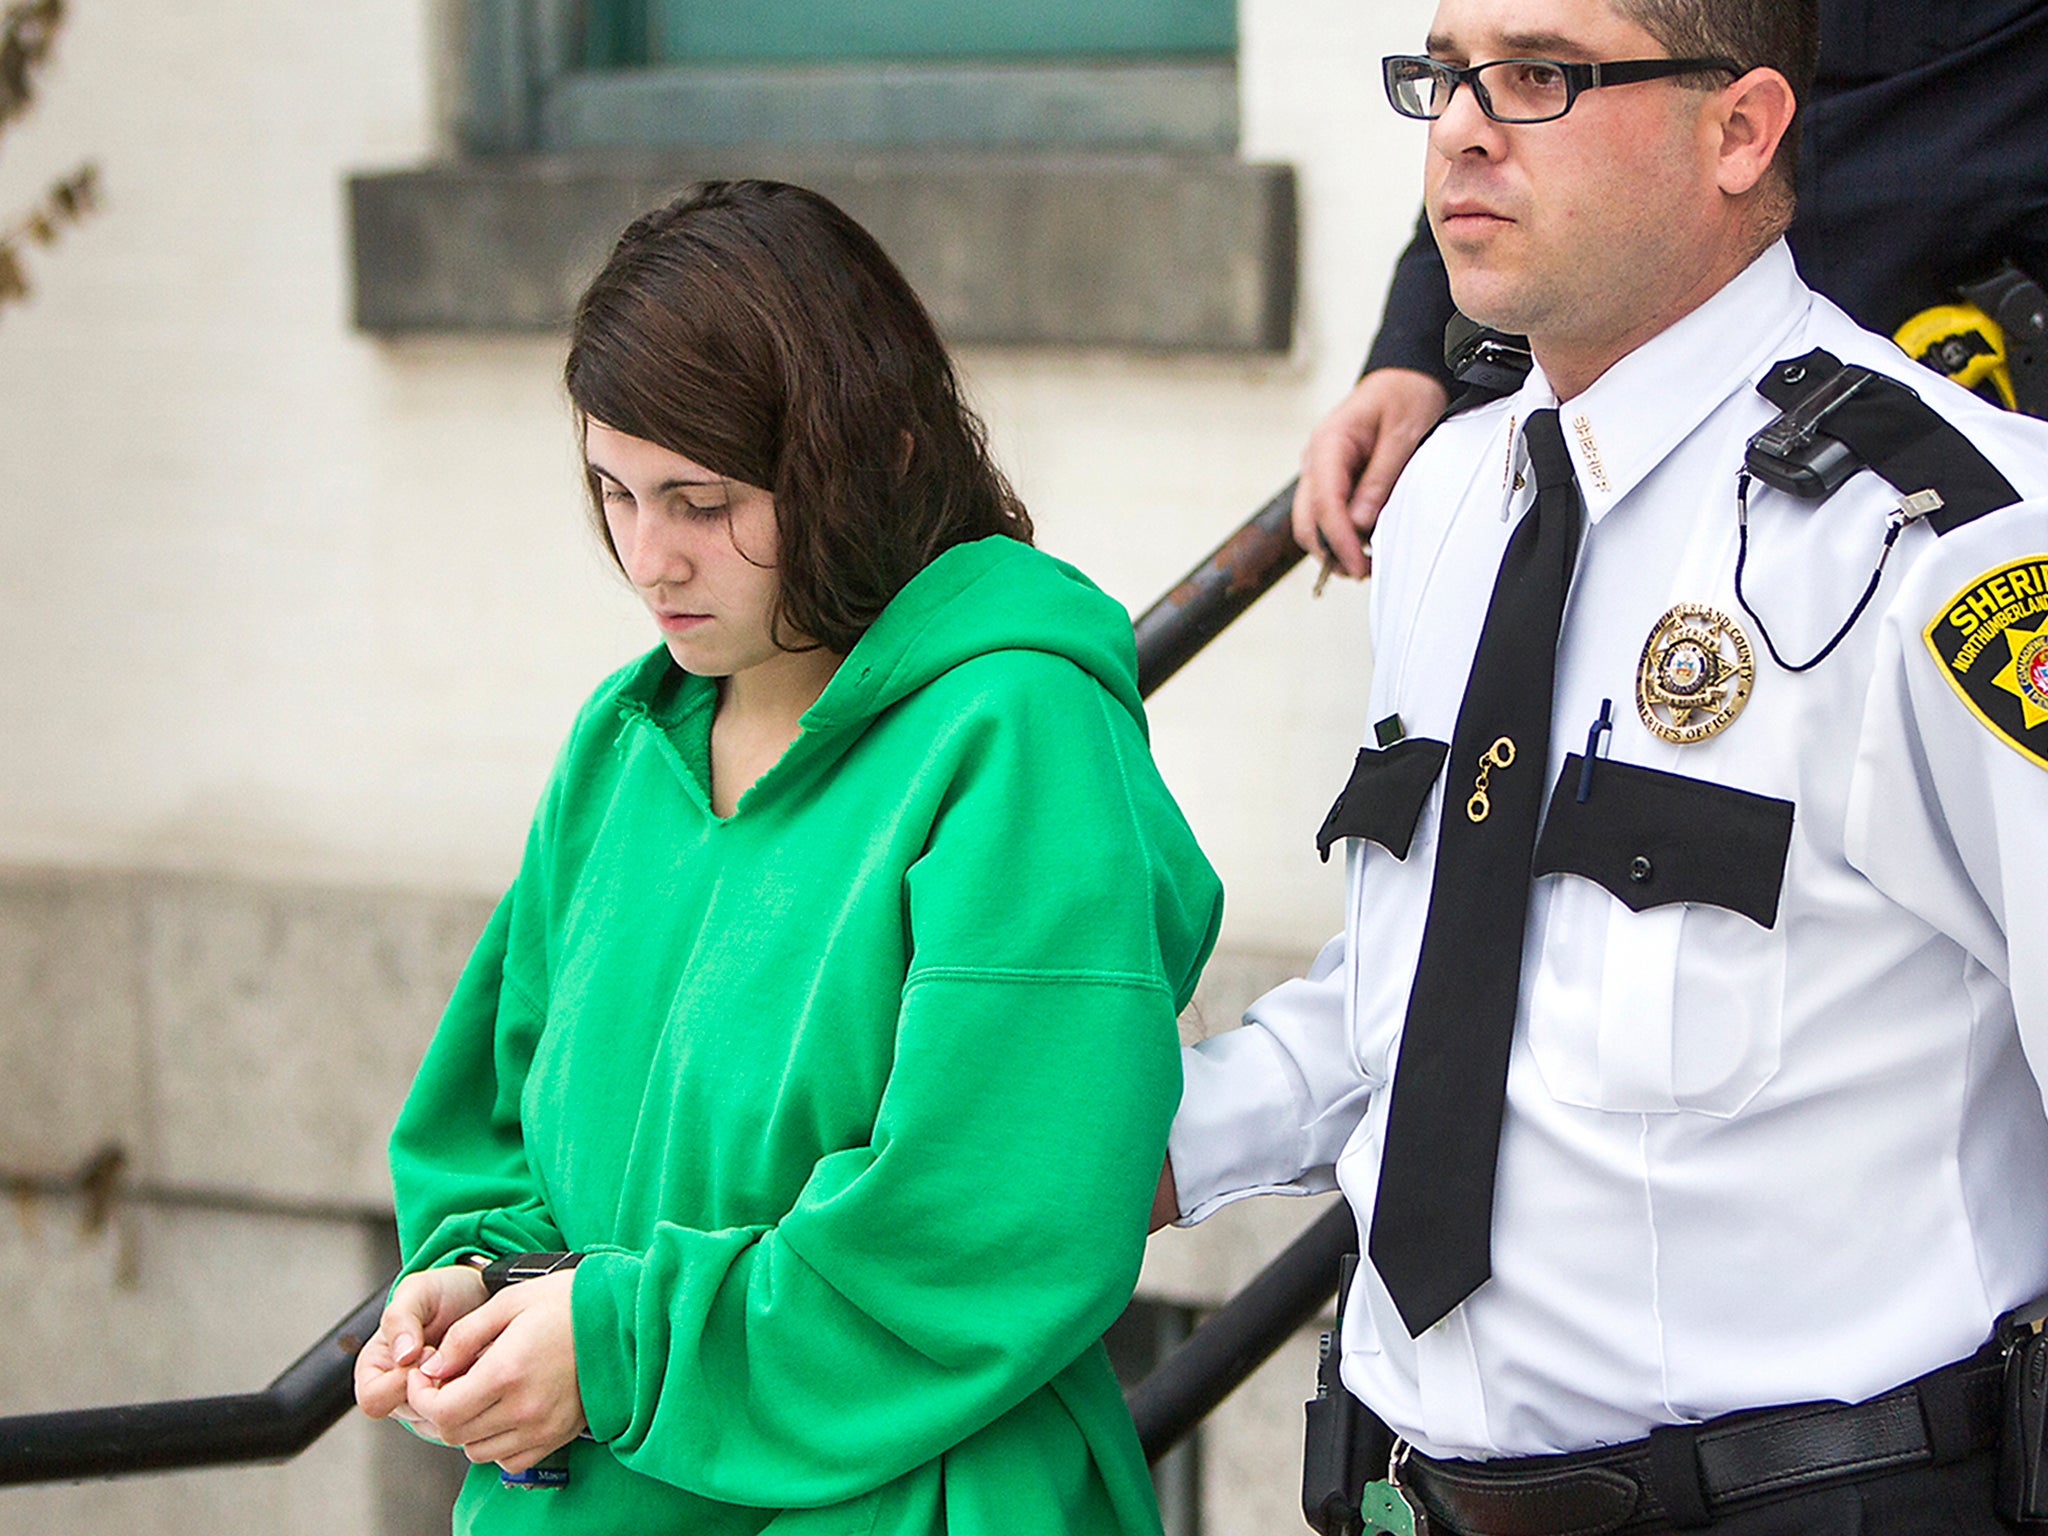 Miranda Barbour is led out of the courthouse after her preliminary hearing in Sunbury